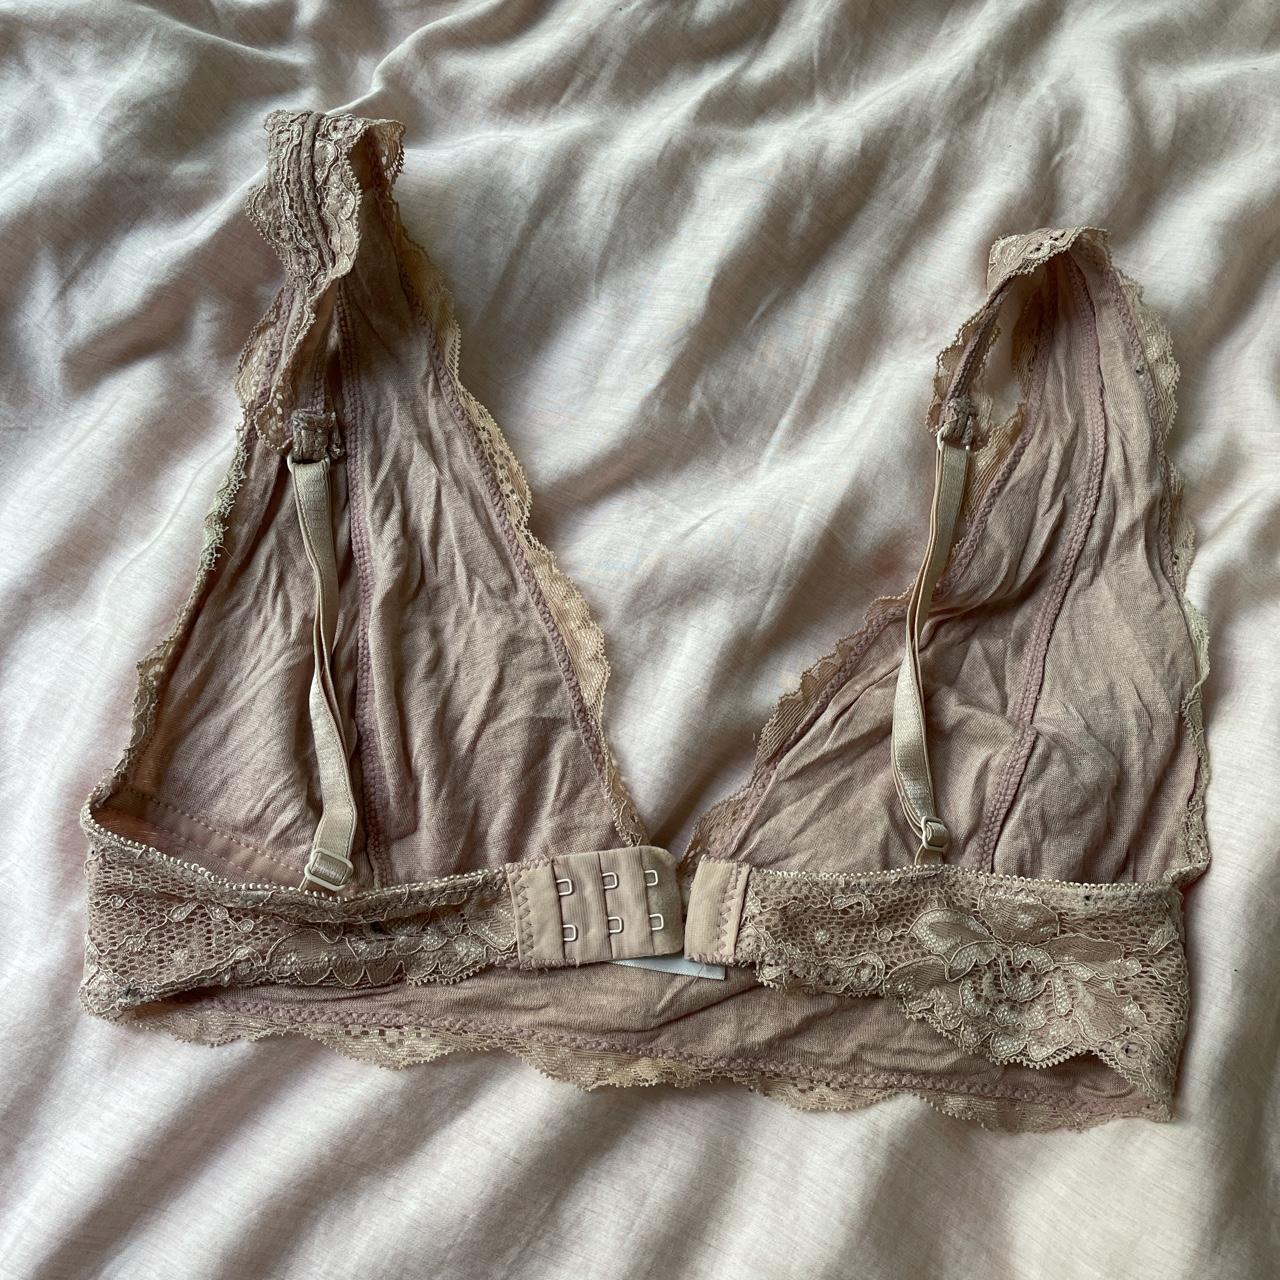 Super flattering and cute bralette from UO years